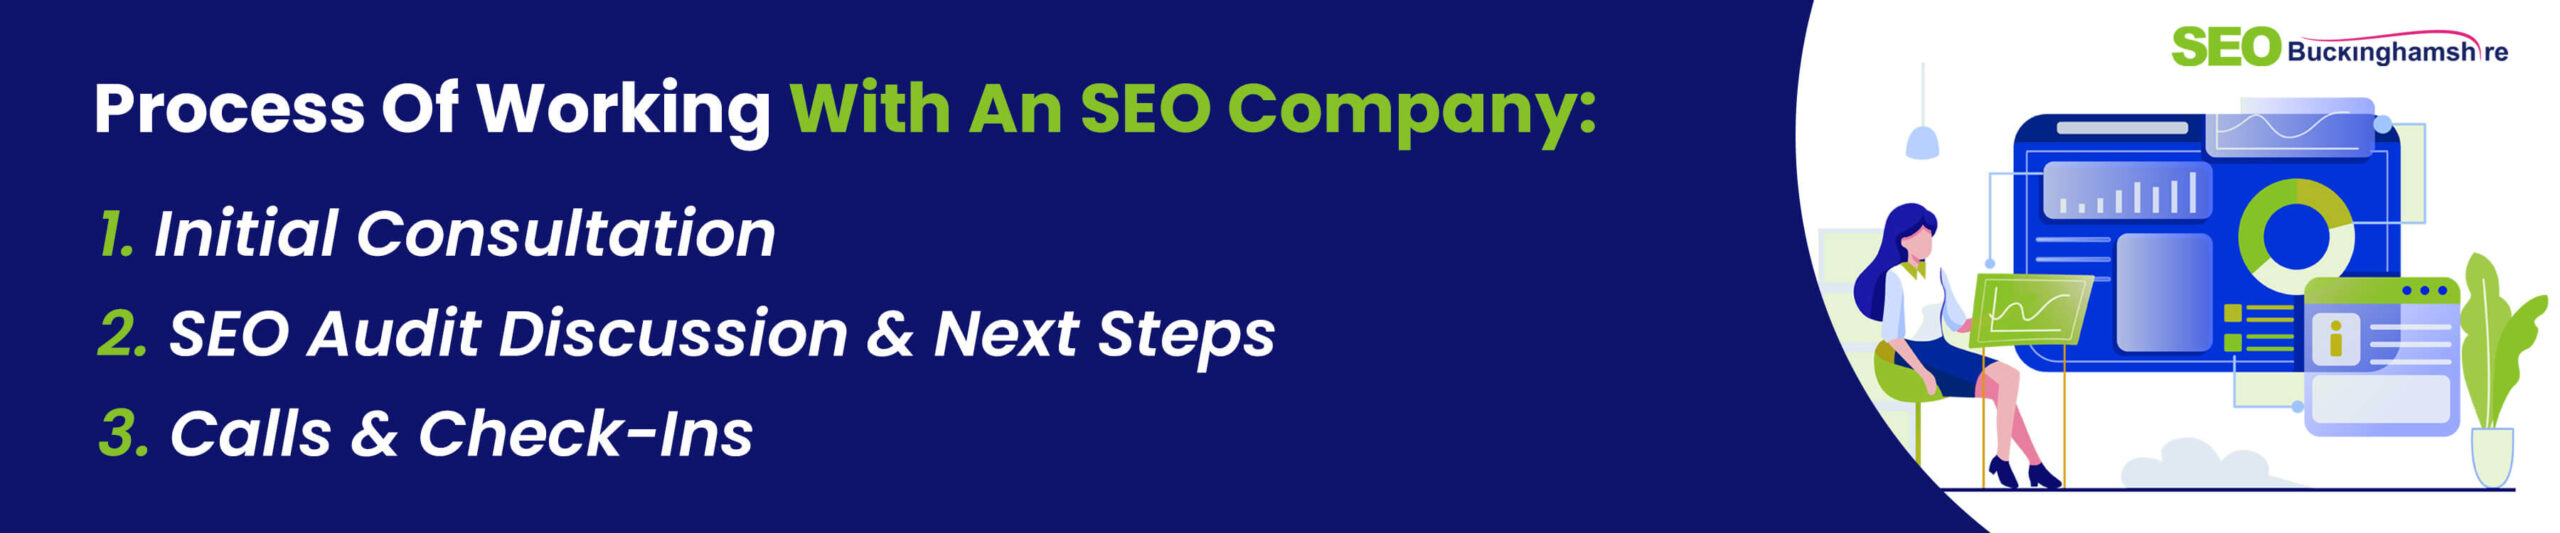 What-Is-An-SEO-Company-Process Of Working With An SEO Company